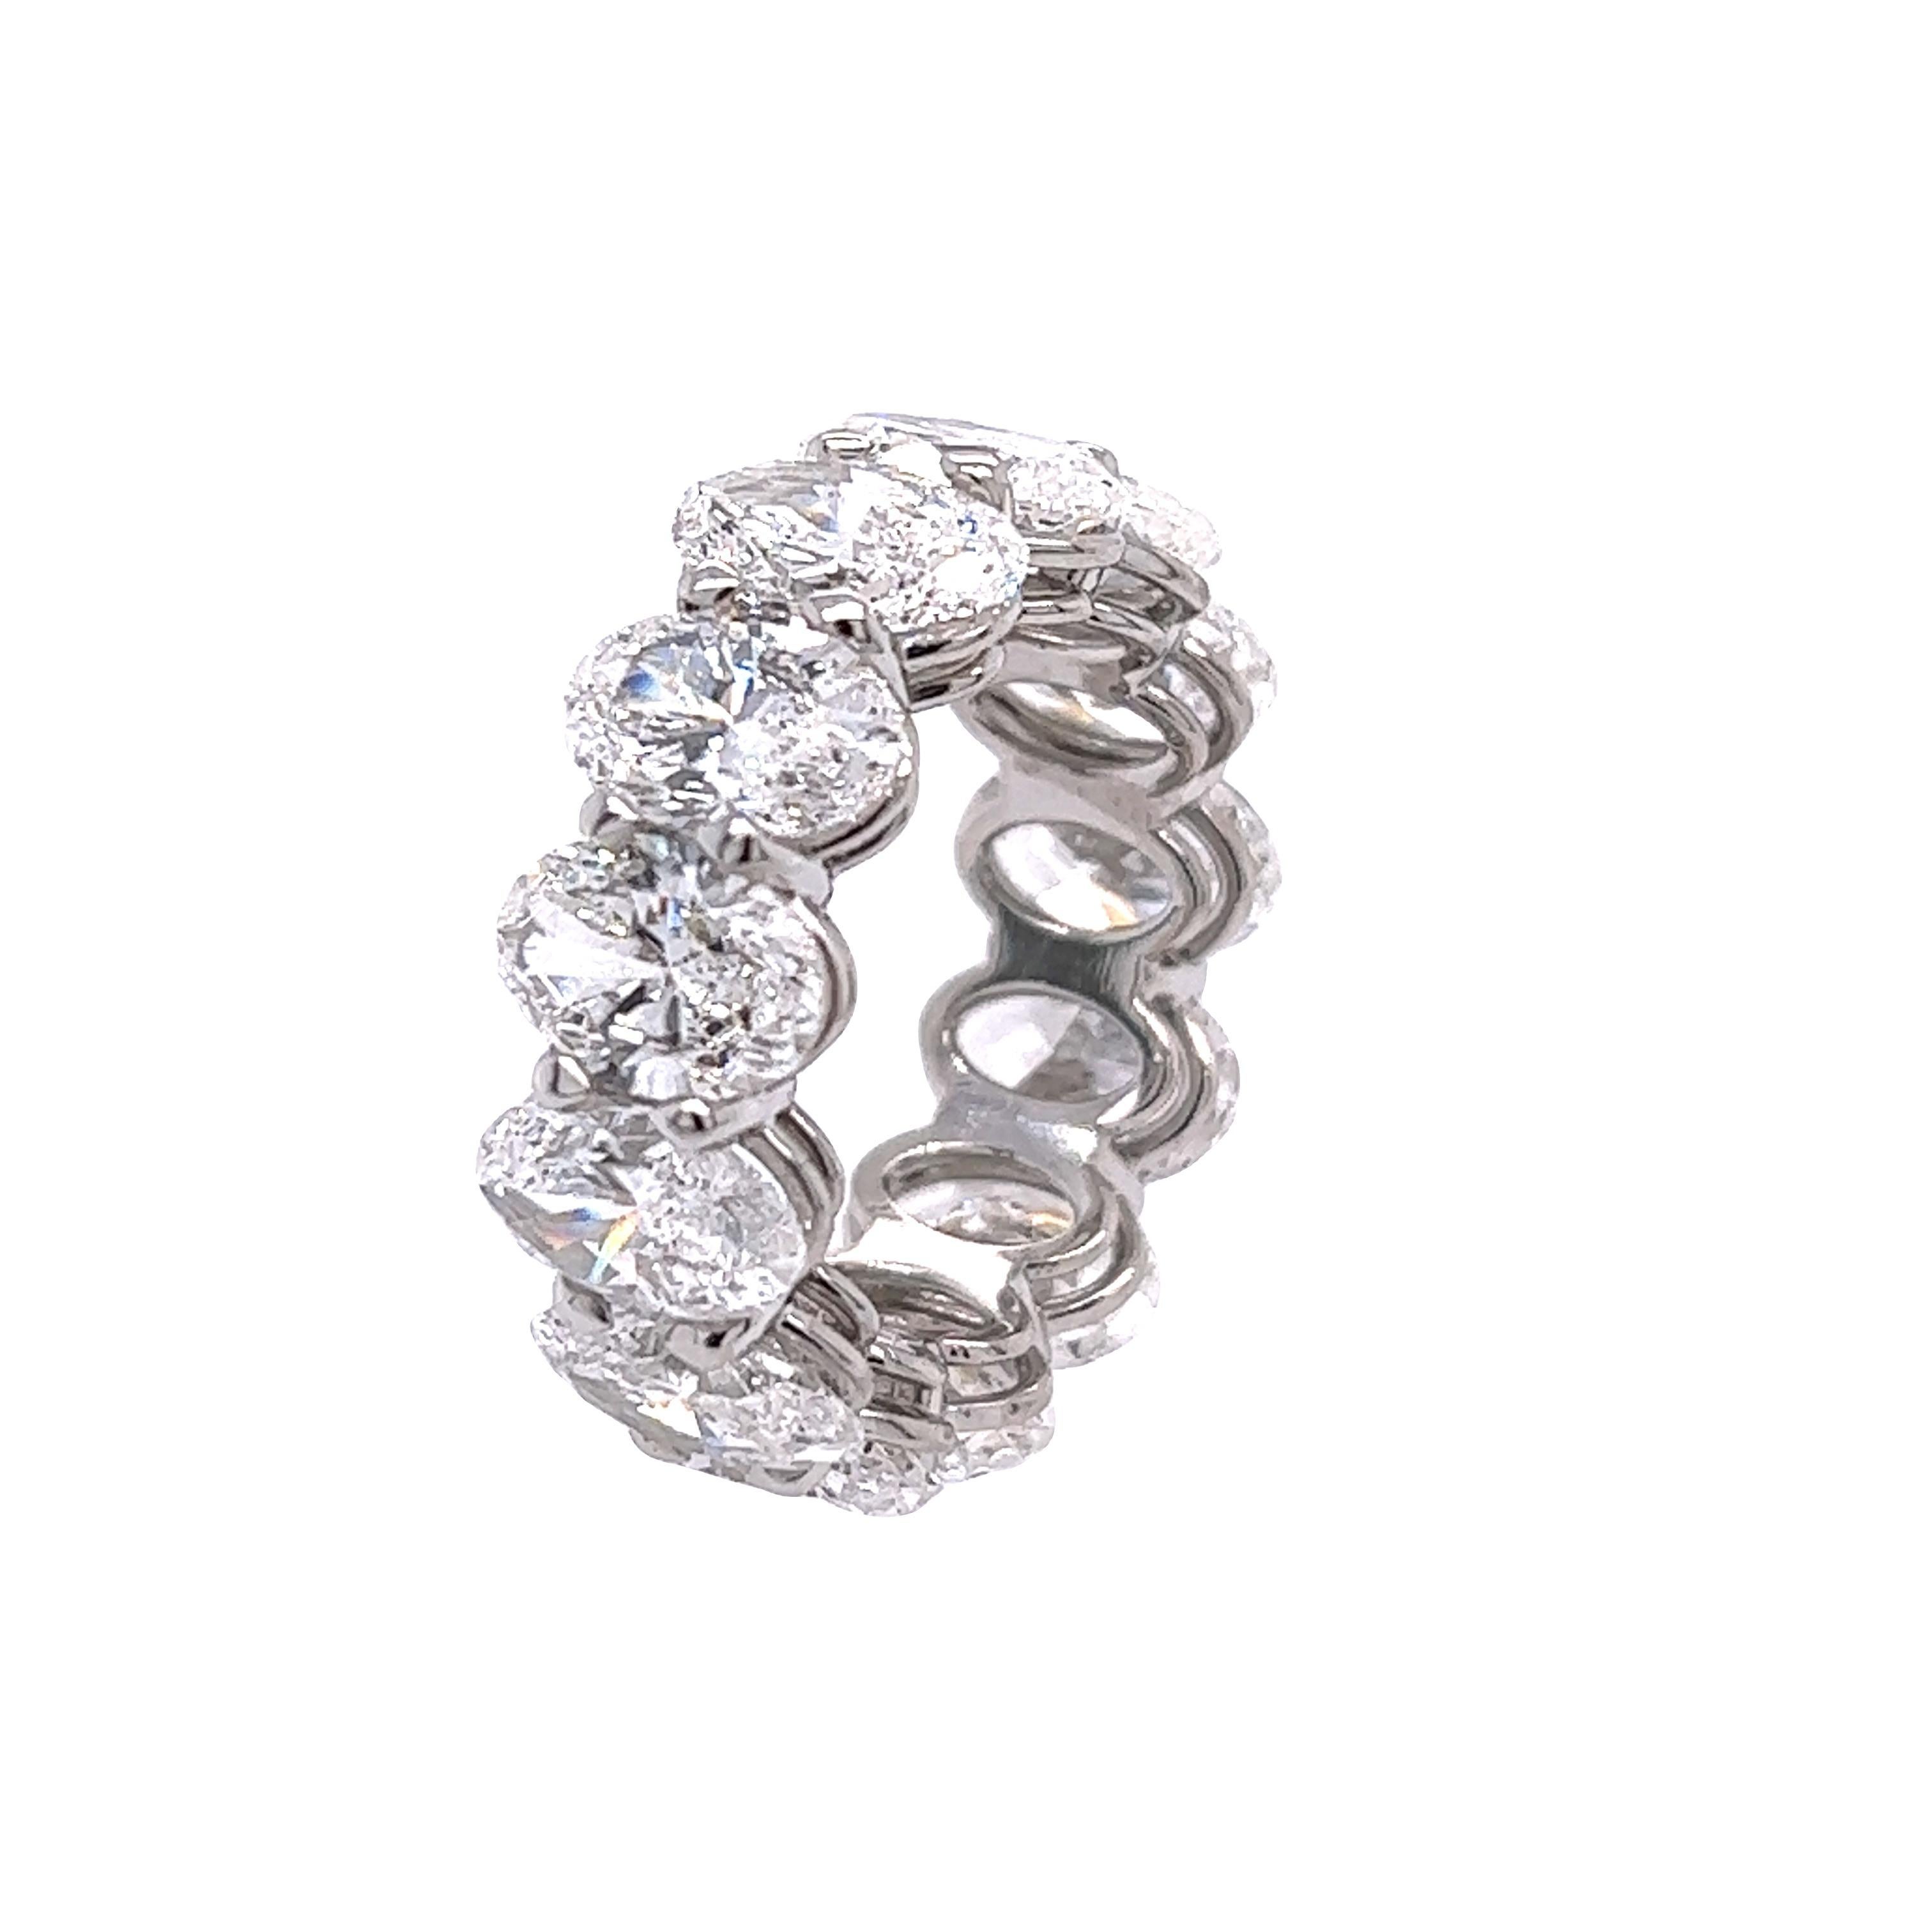 Rosenberg Diamonds & Co. 13.09 total carat weight Oval shape diamond eternity band. This beautiful platinum eternity band has thirteen oval shape diamonds ranging from D-F in color SI1 in clarity with one carat each all accompanied by a GIA